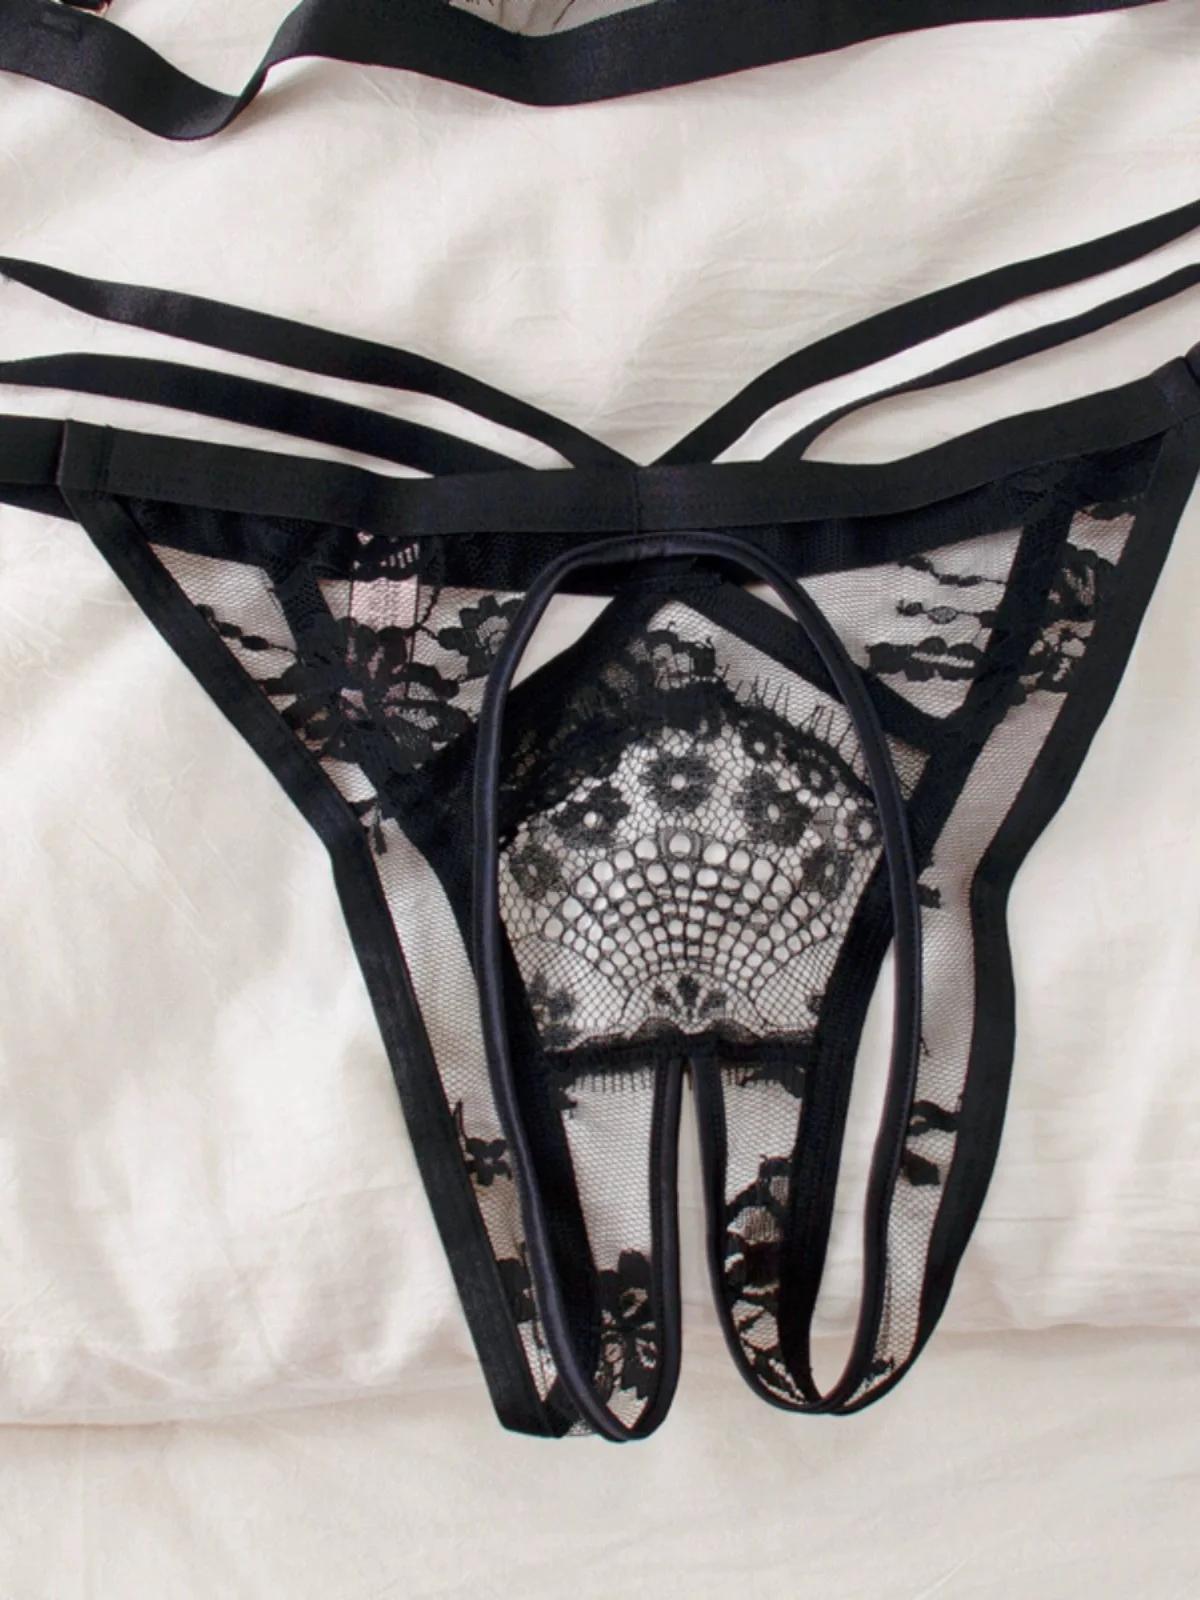 Big Easy- the Lace Bra and Open Gusset Panty Set – Dorothea's Closet Vintage